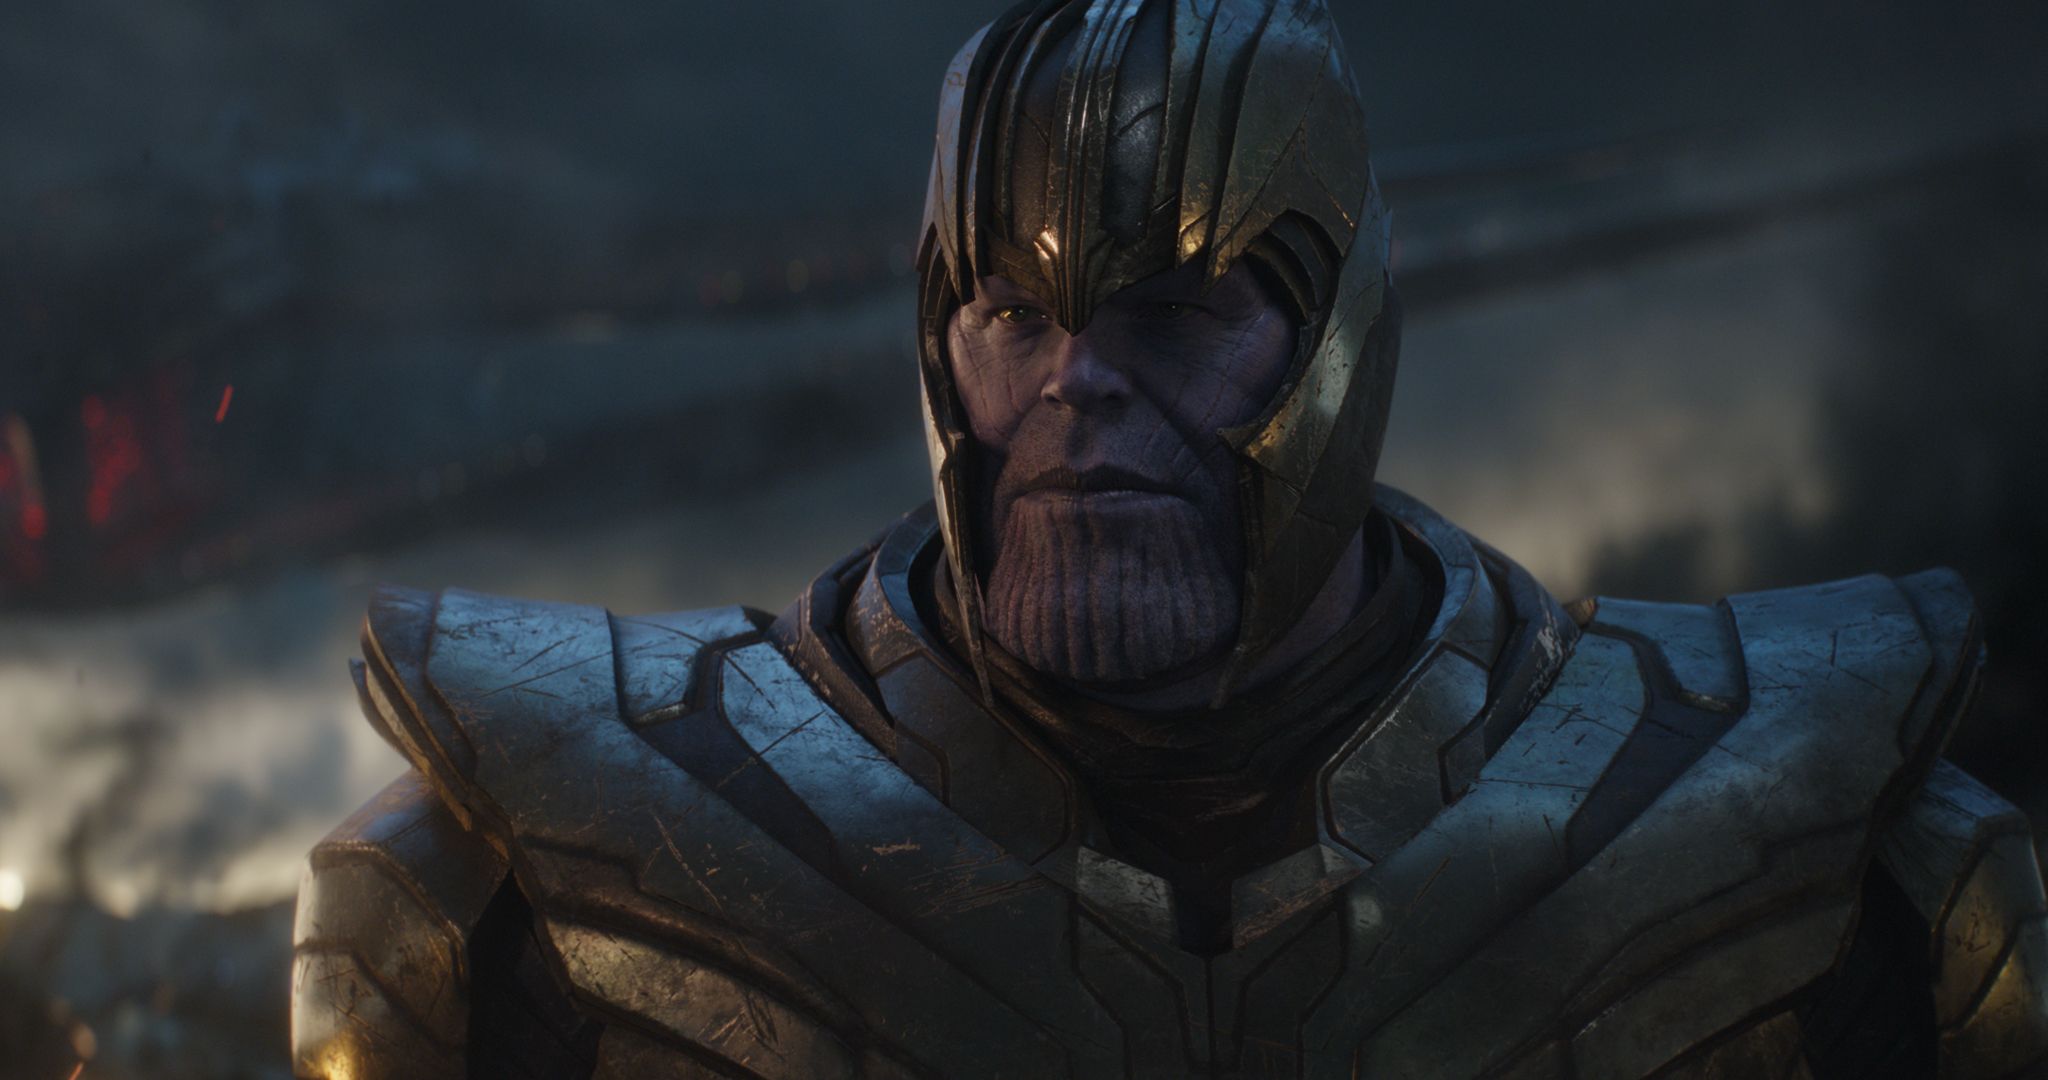 Avengers: Endgame Editor on Handling a Decapitation in a Disney